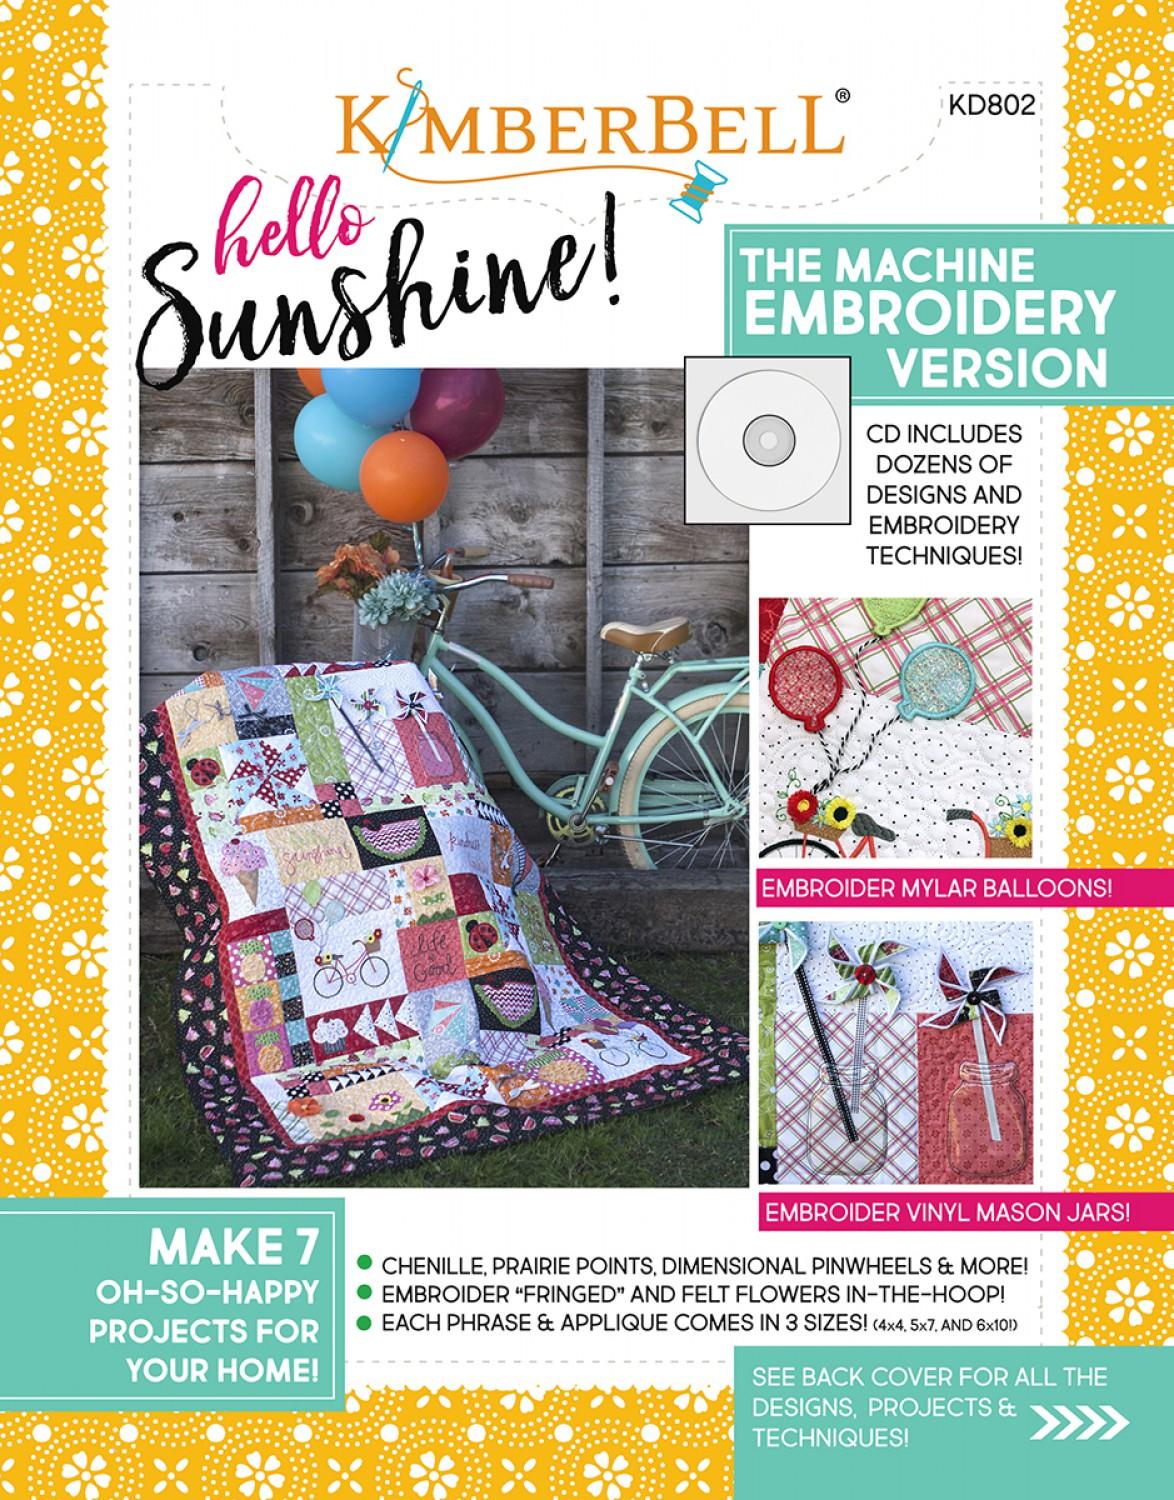 Hello Sunshine Machine Embroidery # KD802 - SPECIAL ORDER